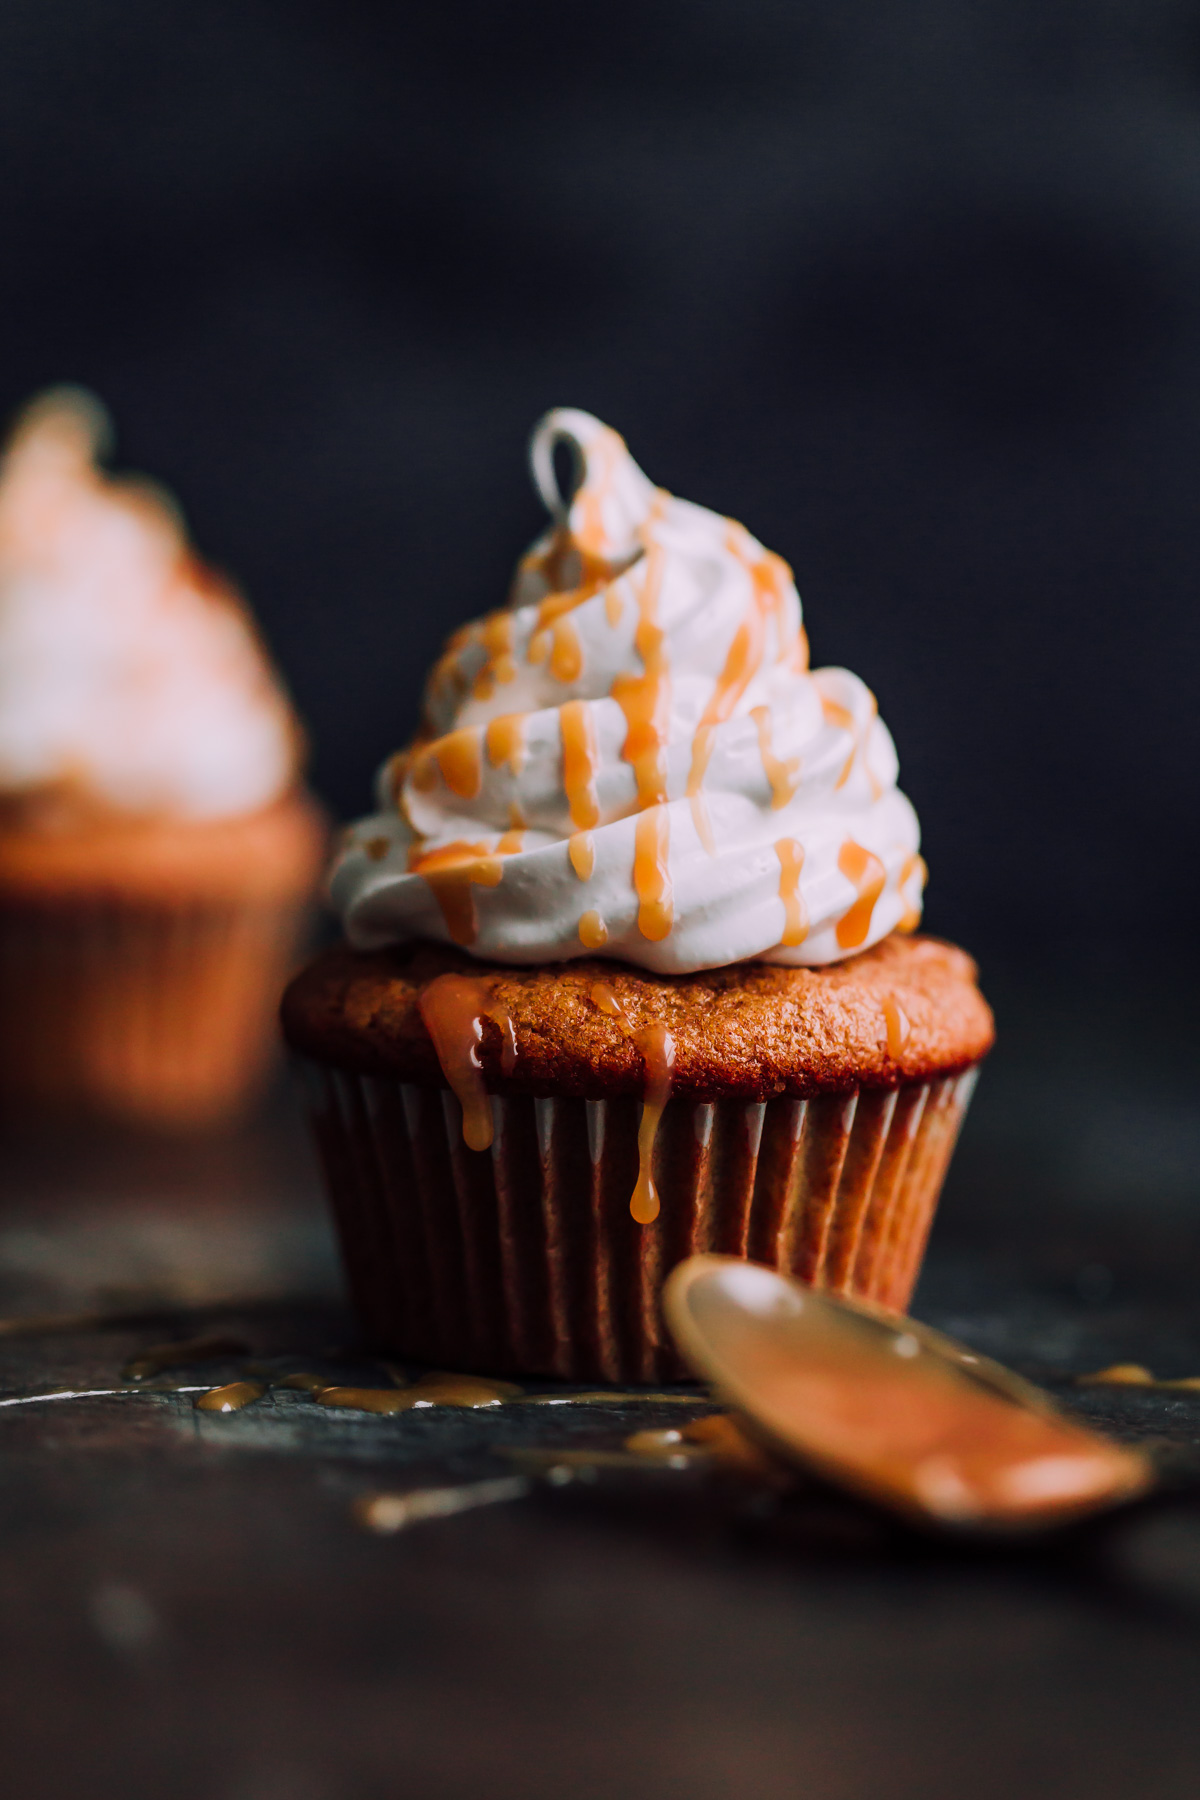 Pumpkin Cupcakes with Marshmallow Frosting and Caramel. This decadent fall cupcakes are lightly spiced and make a wonderful portable fall dessert. #pumpkin #caramel #dessert